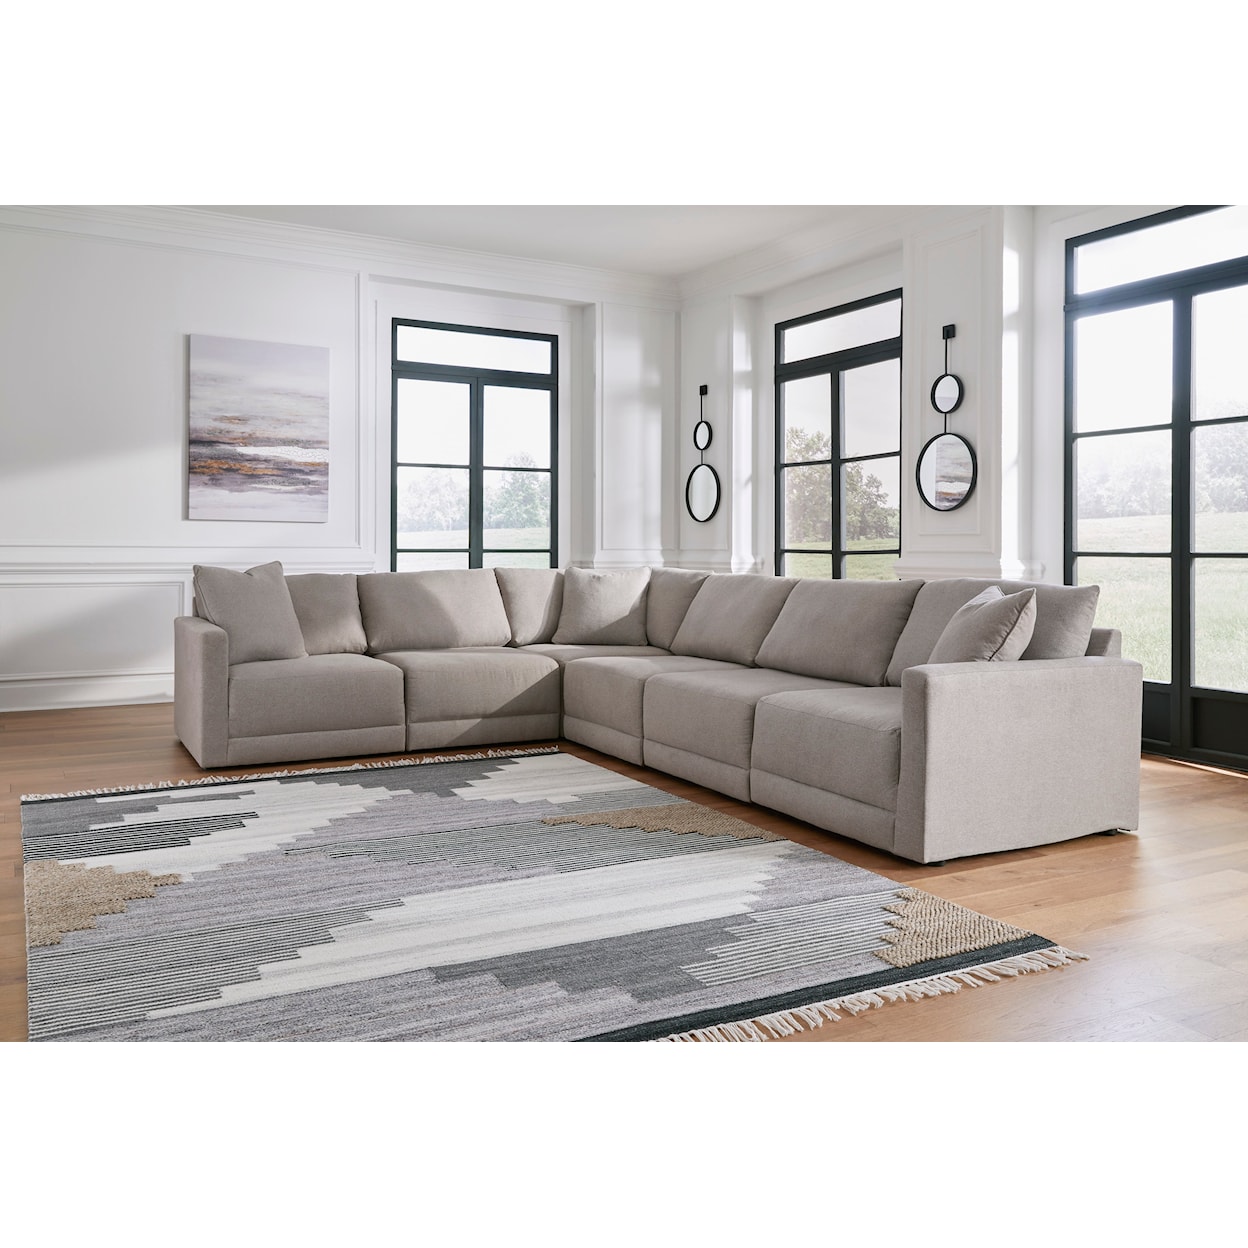 Benchcraft by Ashley Katany 6-Piece Modular Sectional